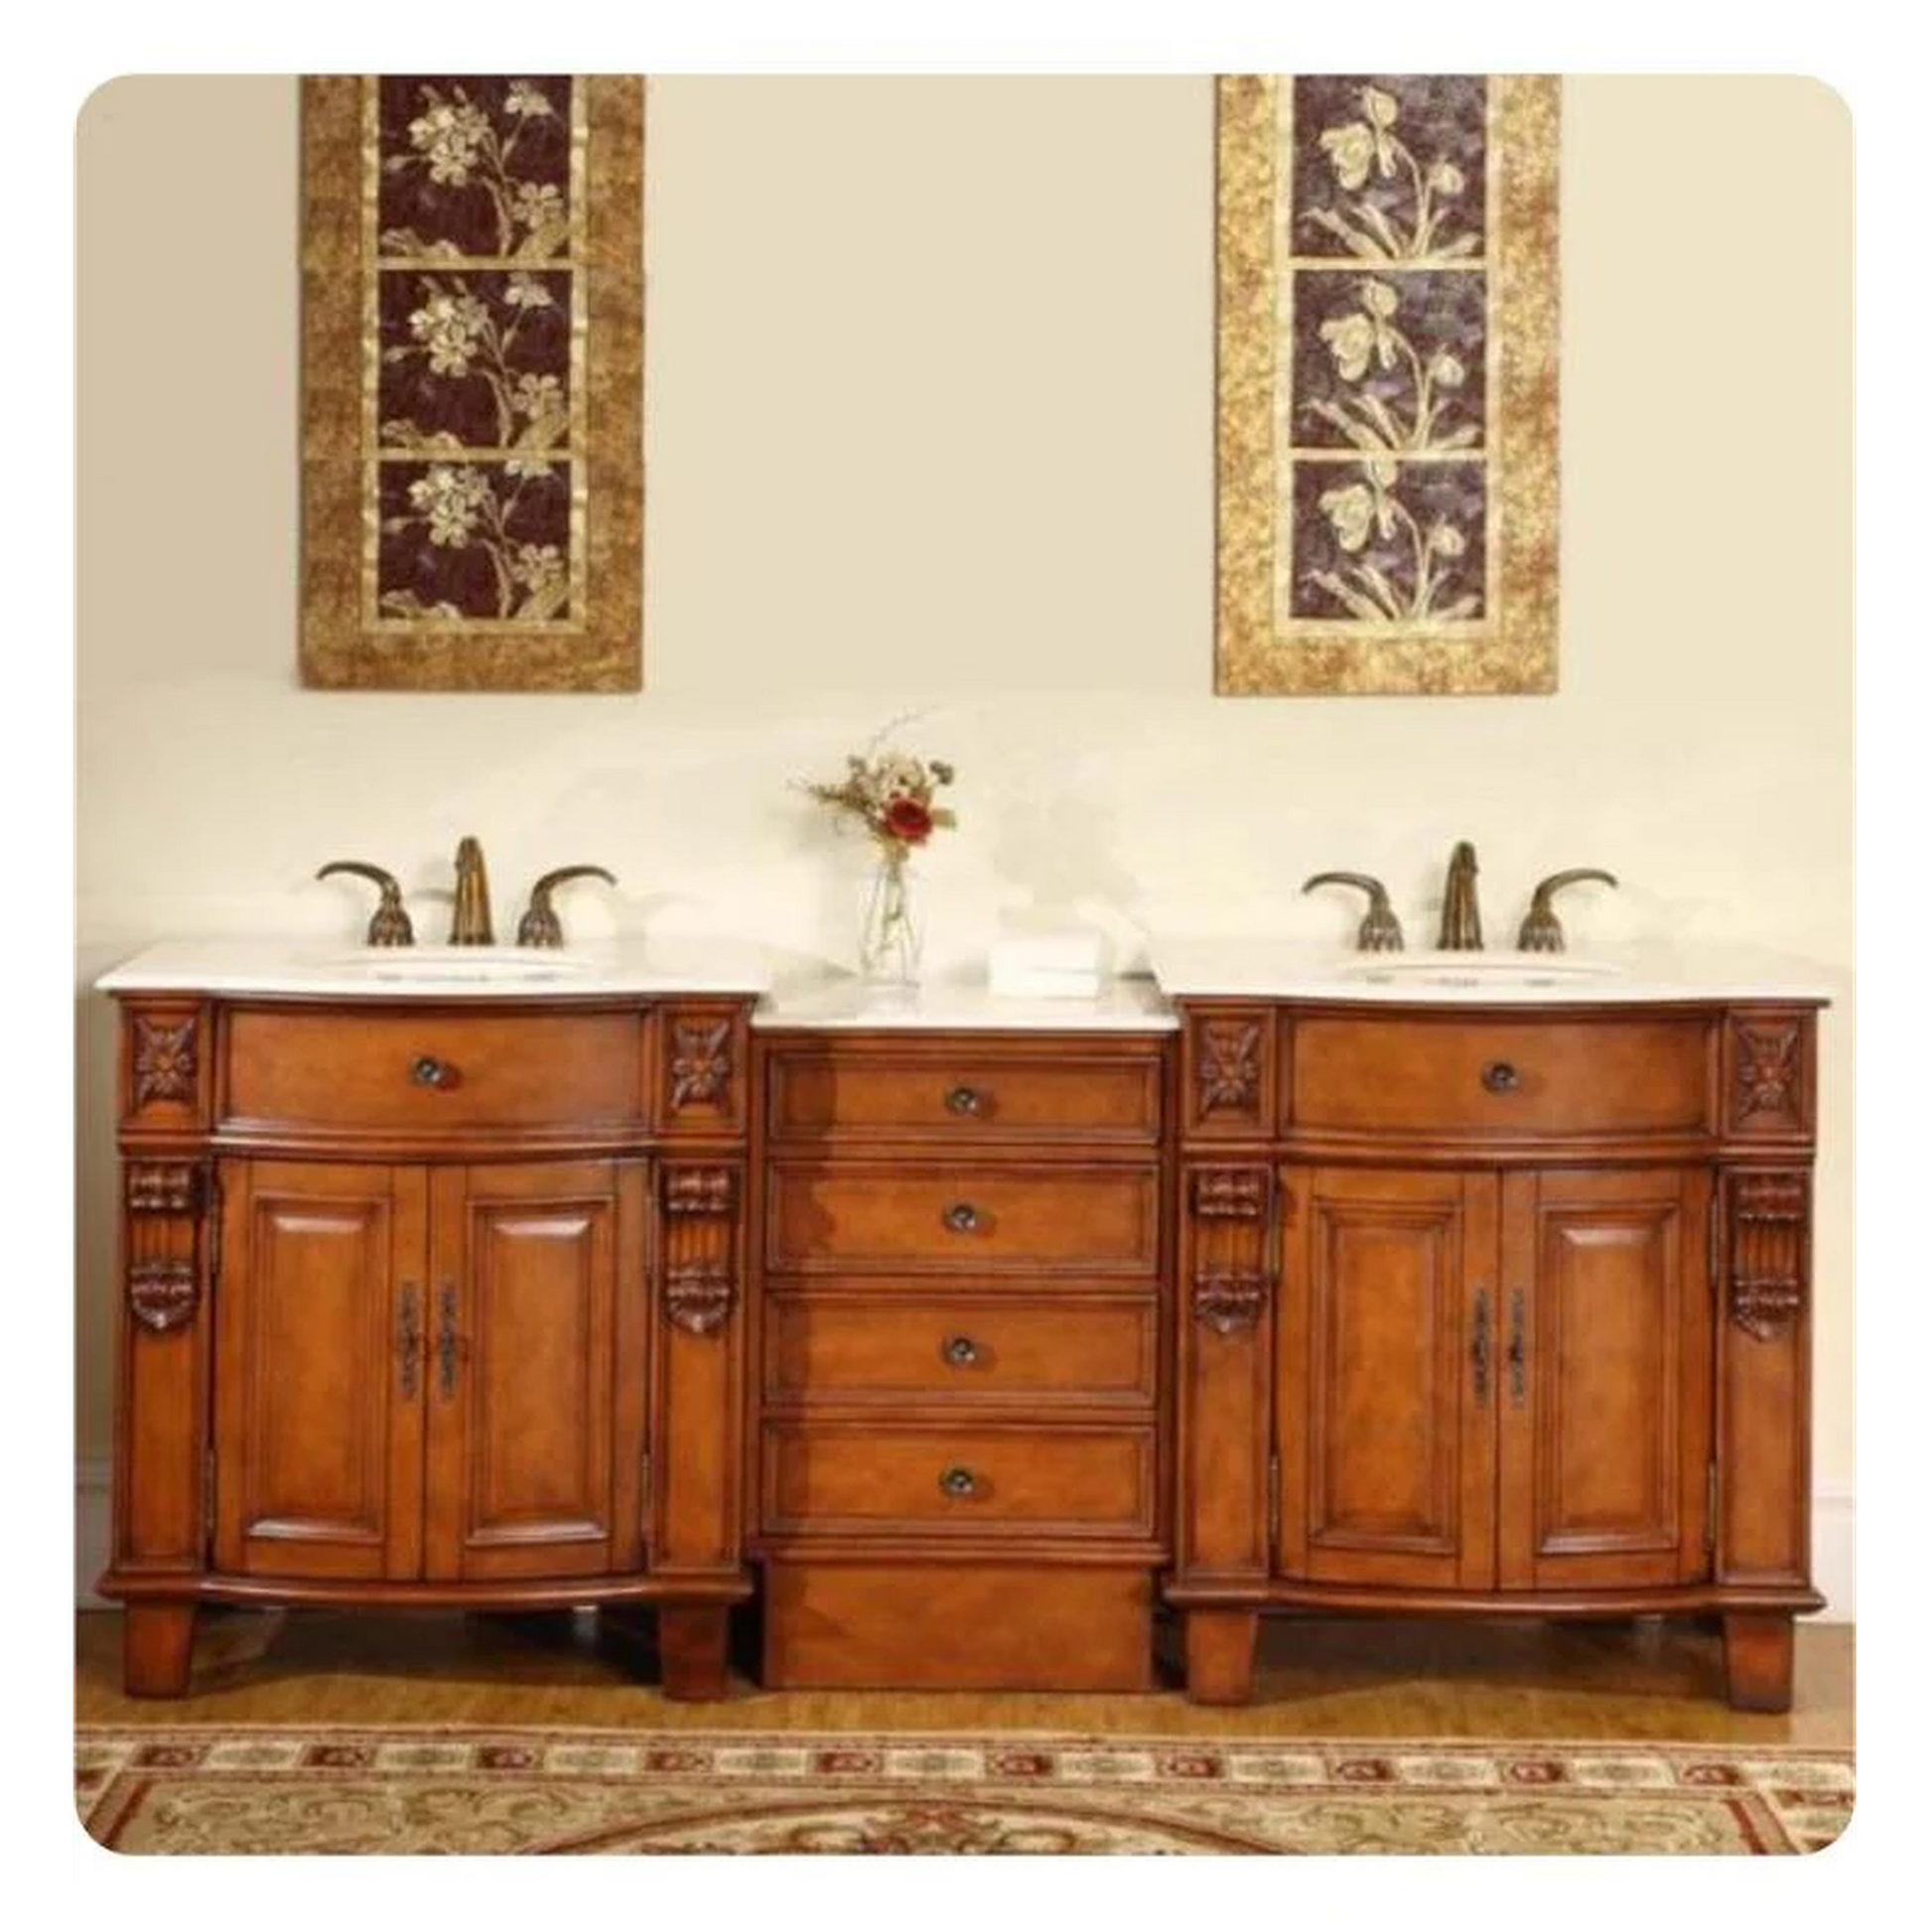 Silkroad Exclusive 84" Double Sink Cherry Modular Bathroom Vanity With Crema Marfil Marble Countertop, Ivory Ceramic Undermount Sink and Drawer Bank Cabinet